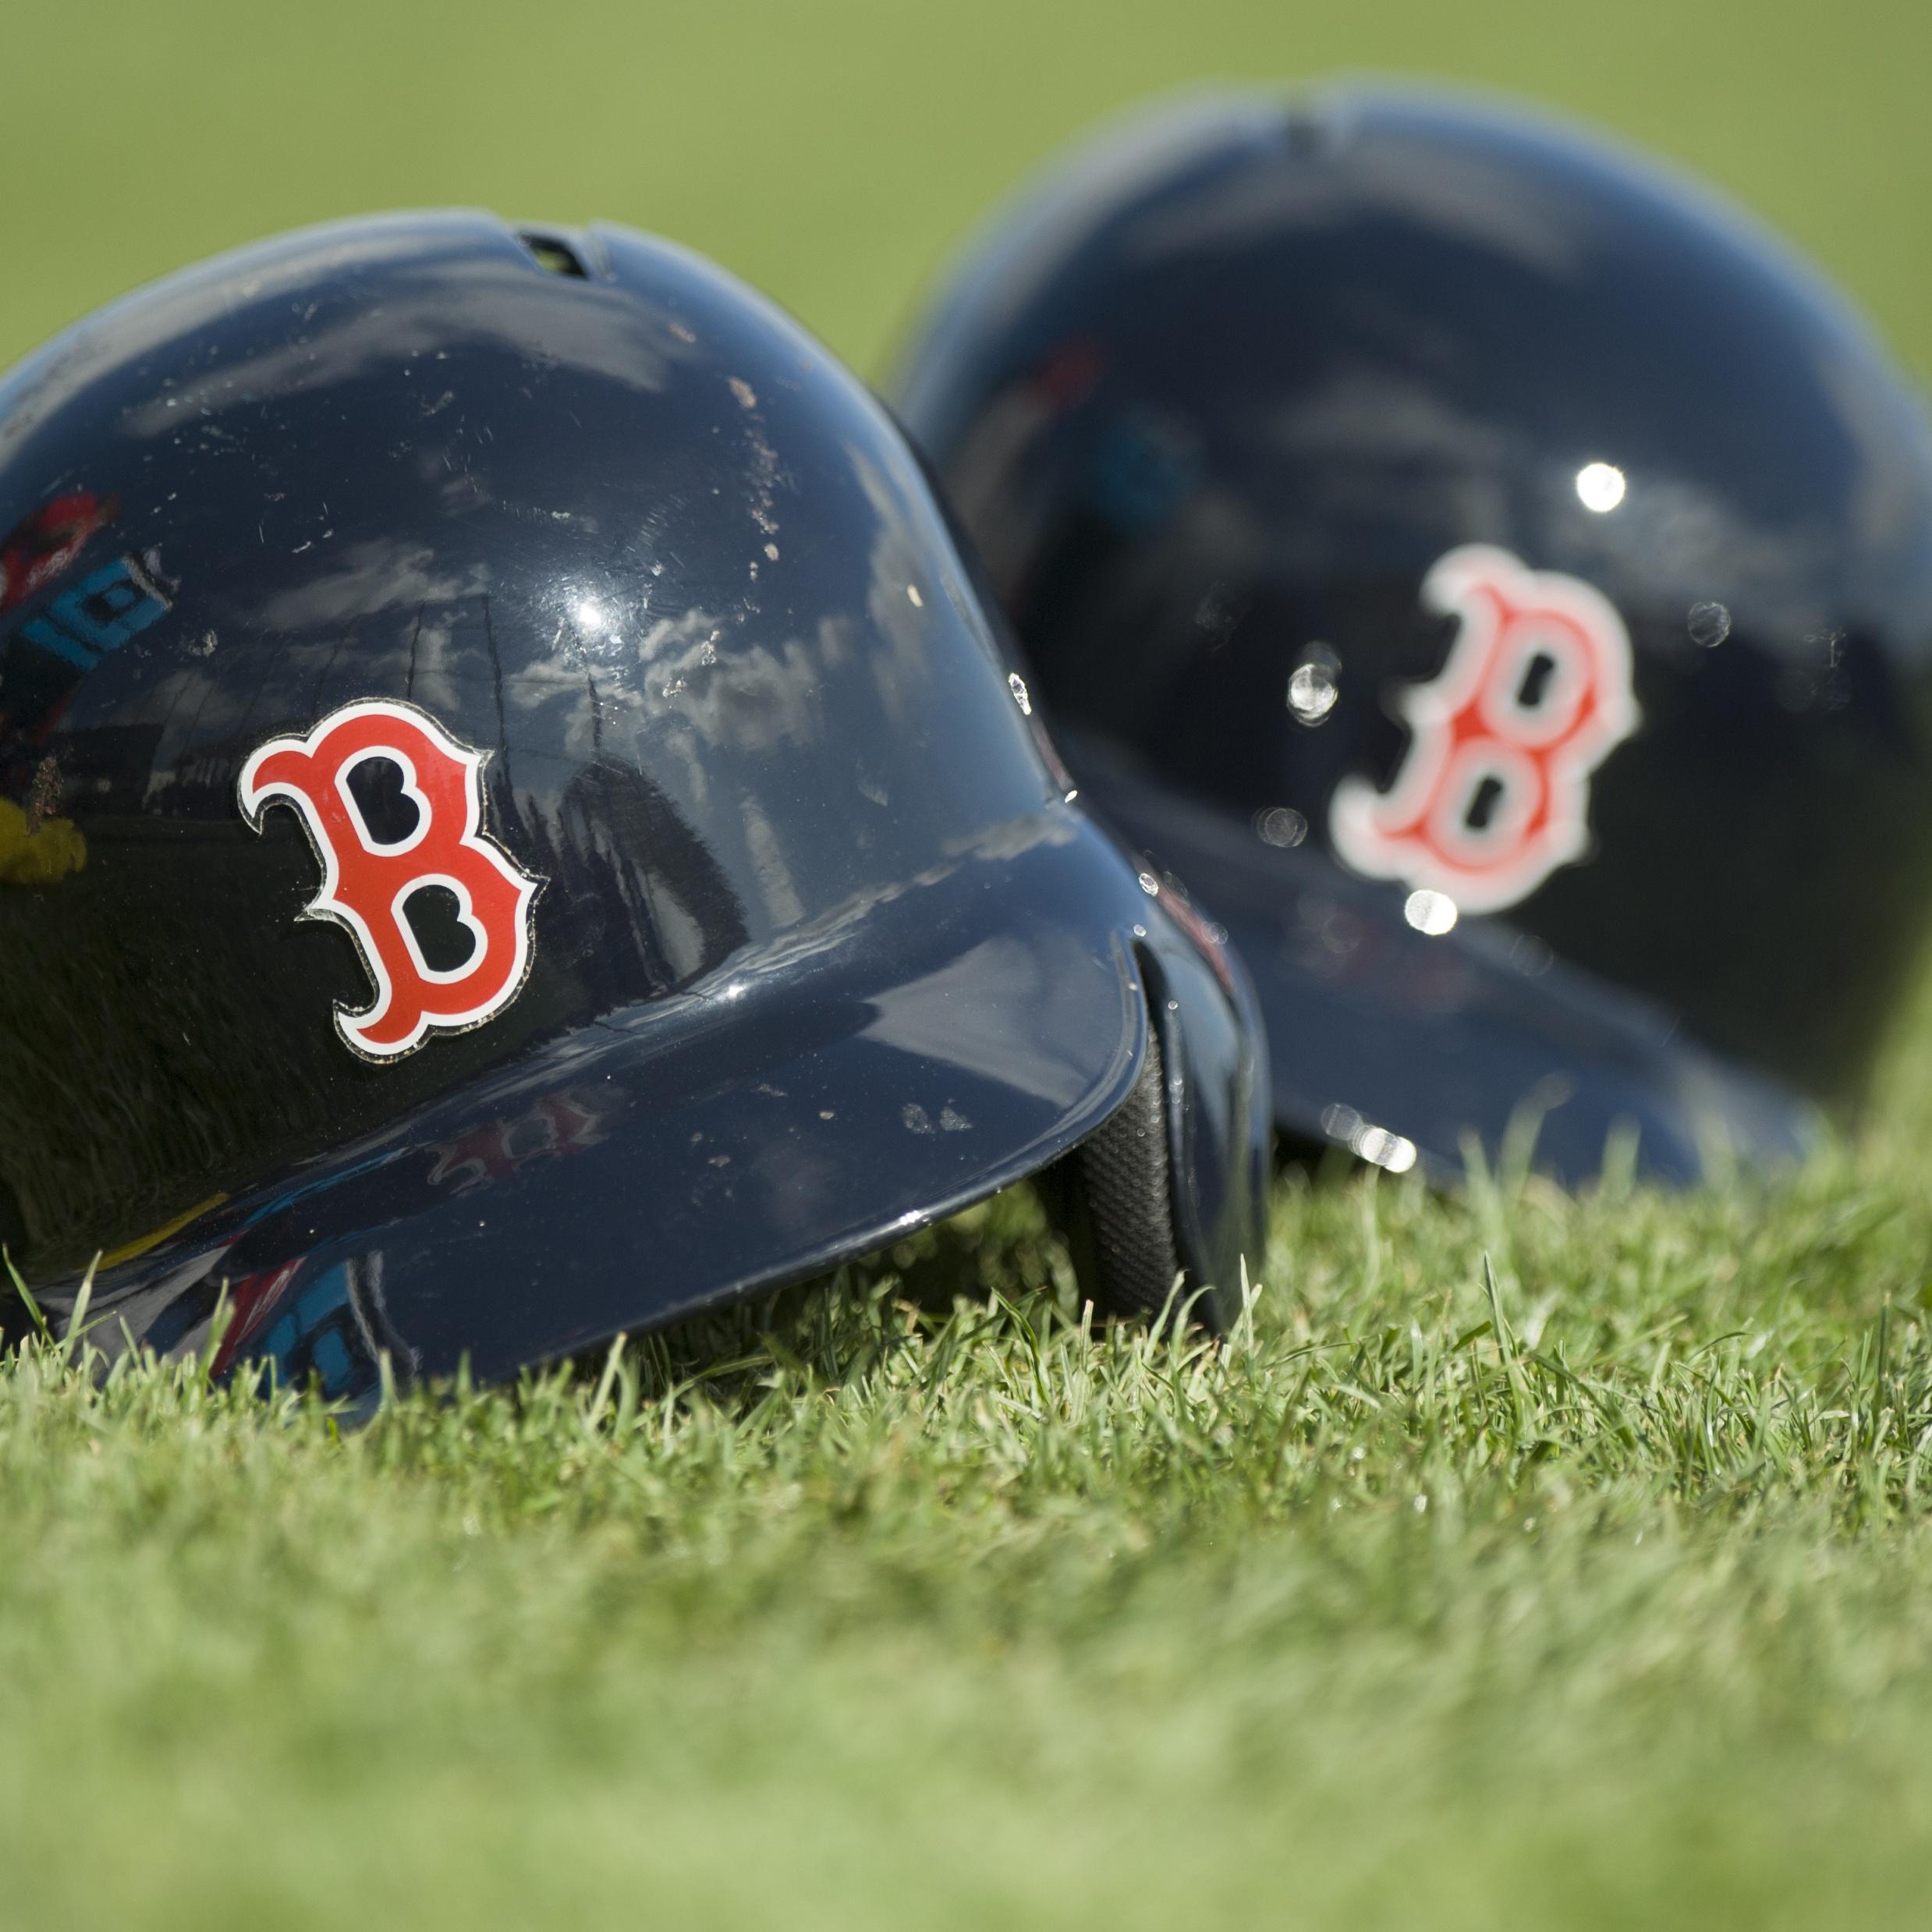 Boston Red Sox MLB and minor league baseball news and community from the @ScoutMedia network.